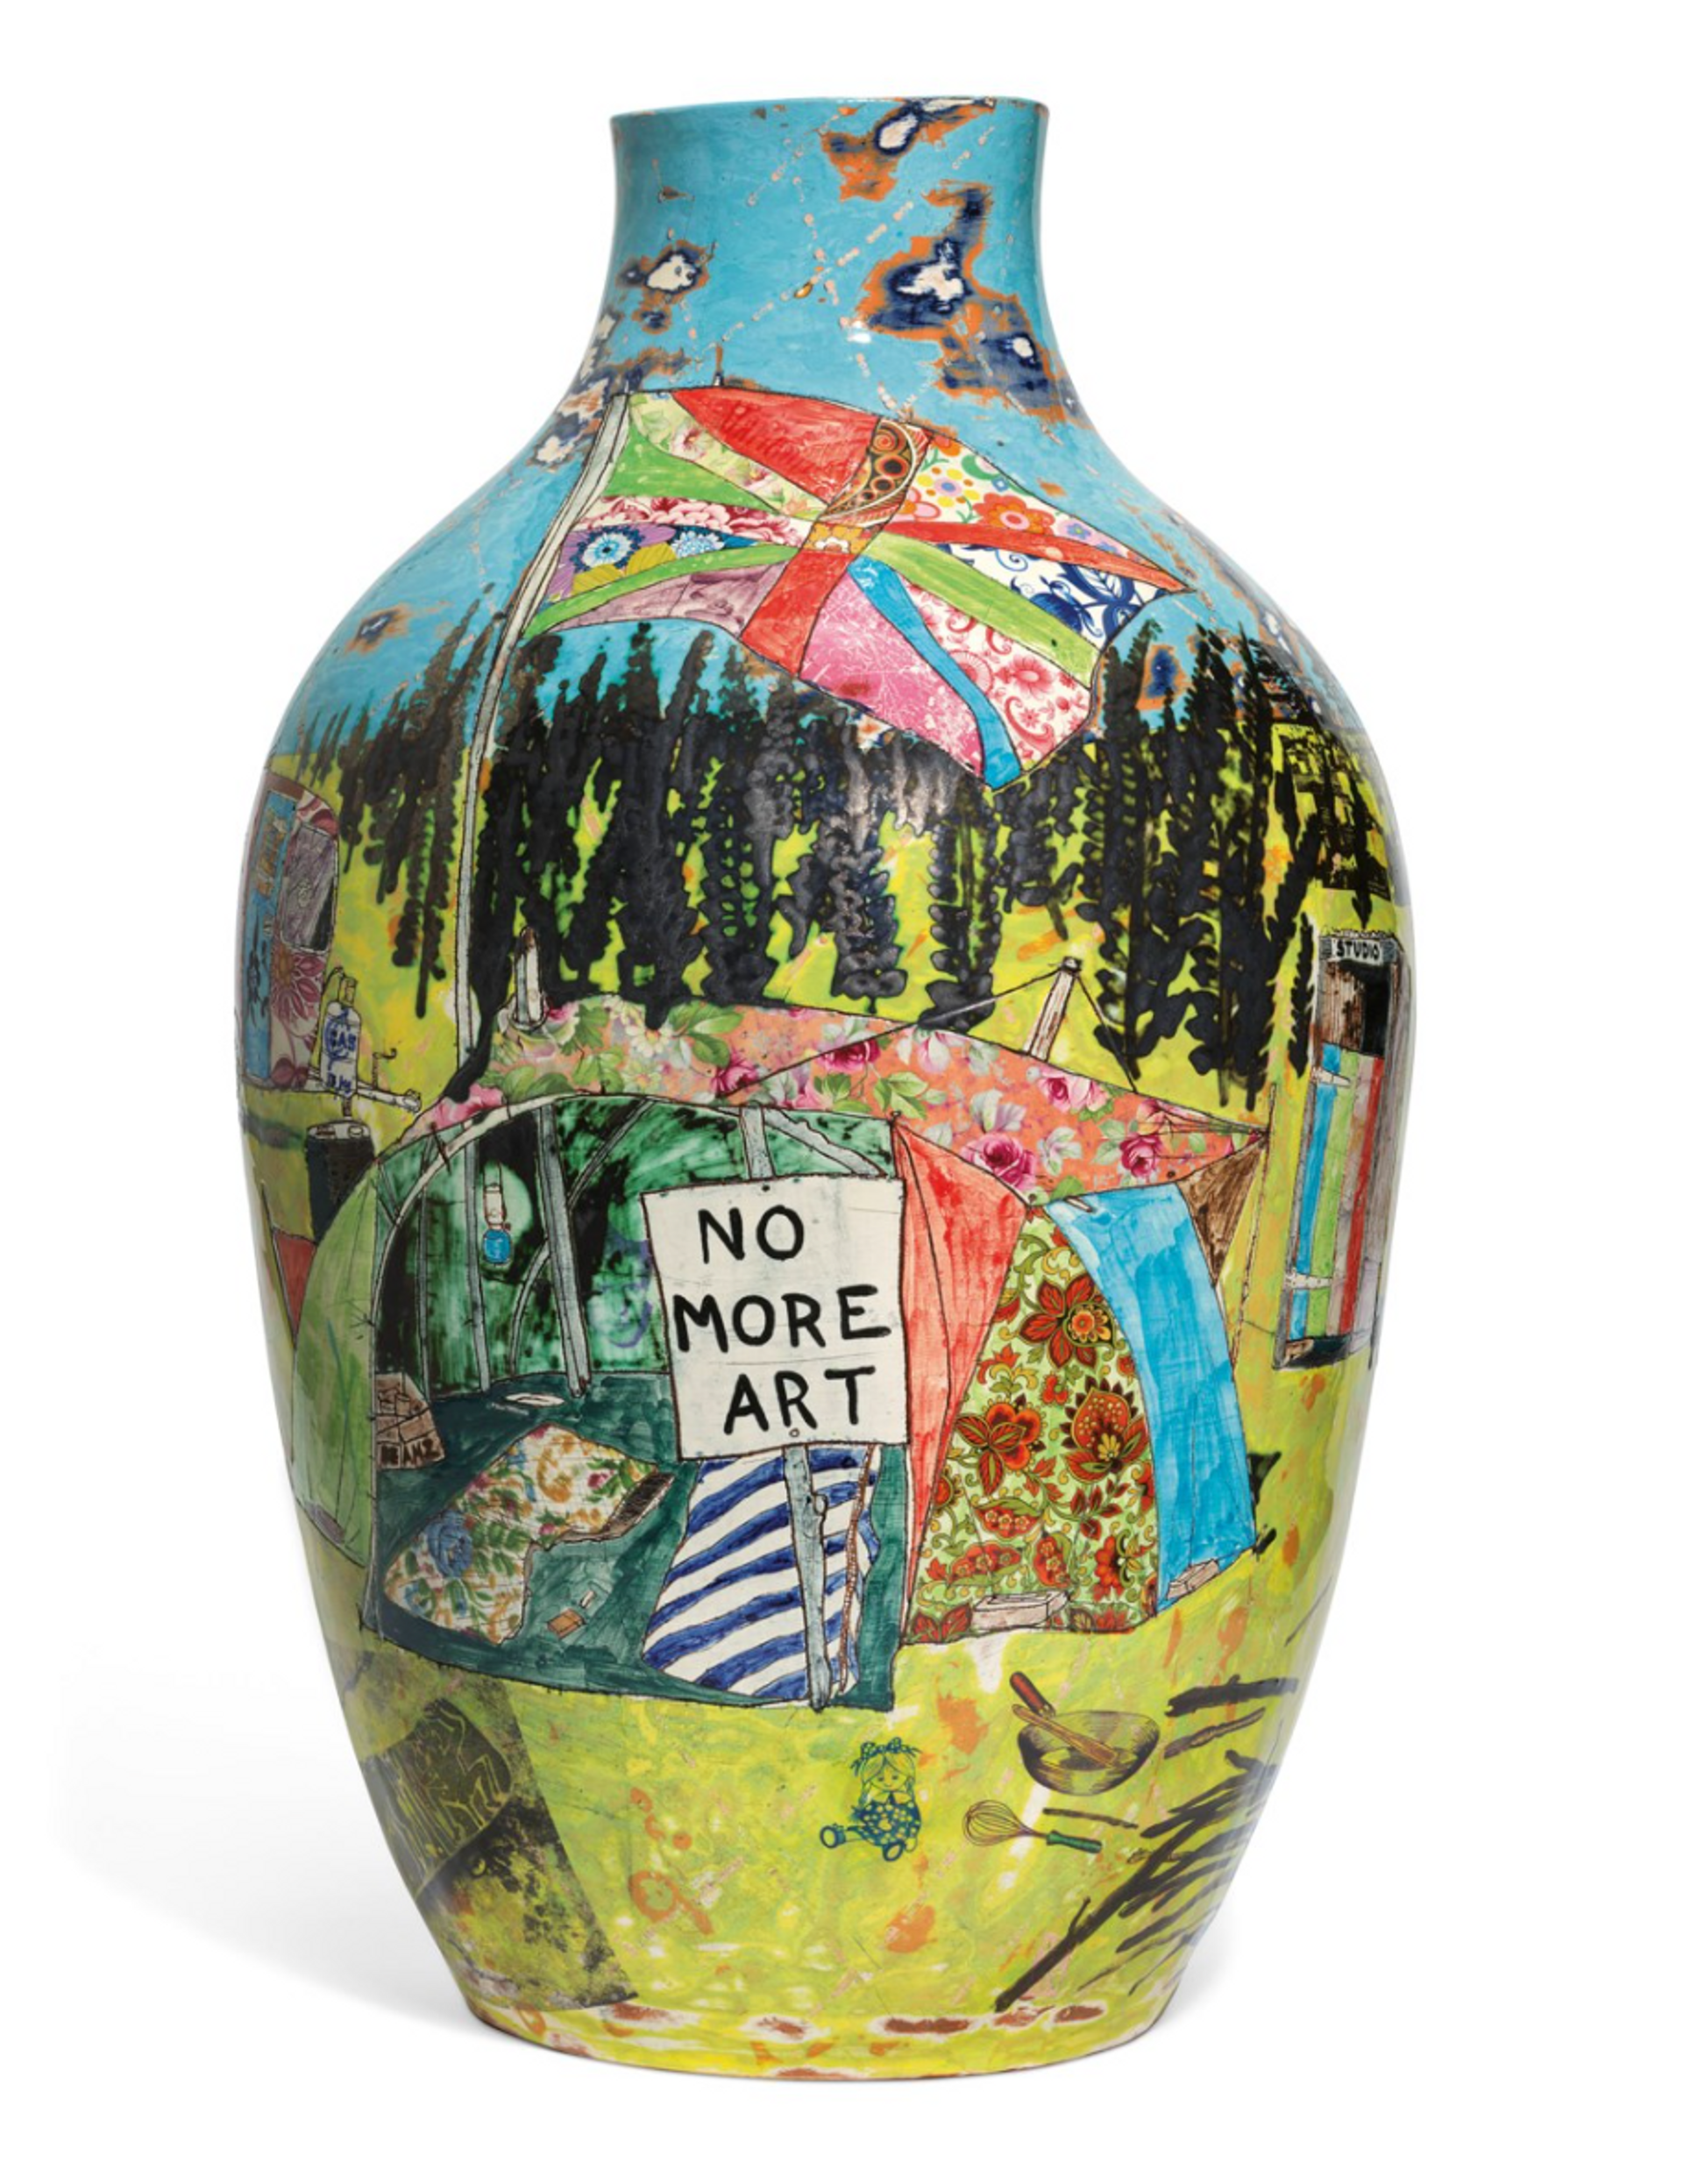 Ceramic vase by Grayson Perry, depicting tents pitched in in a protest area in front of a forest. There is a colourful union jack flag and a sign which reads 'no more art'.